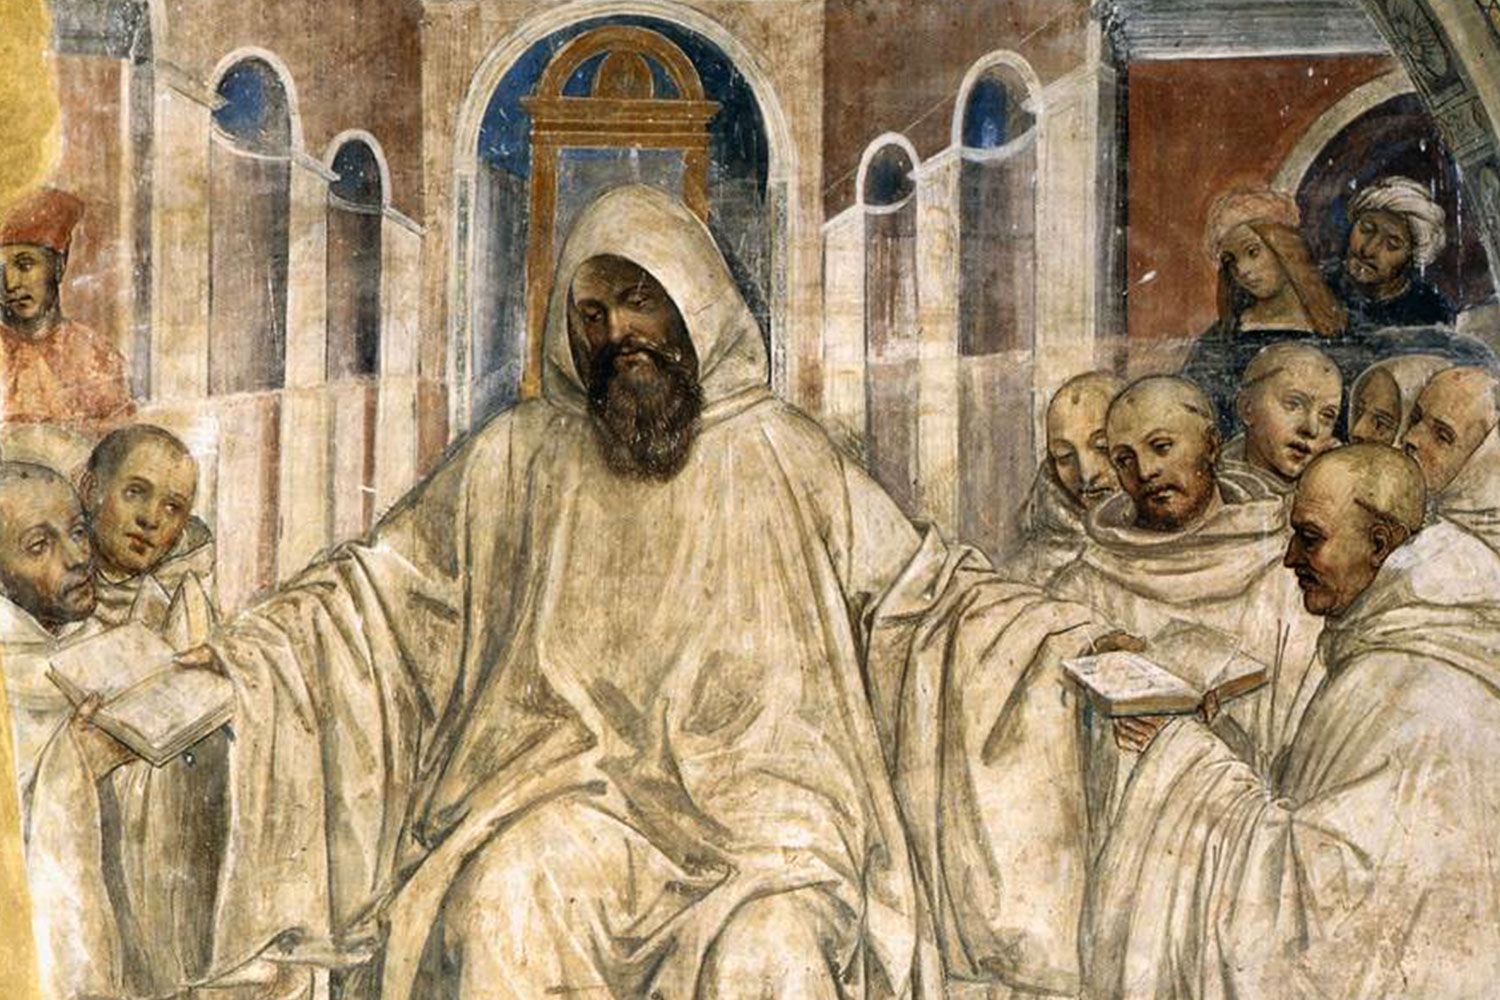 Sodoma’s fresco Benedict Presents the Olivetan Monks with His Rule (1505-08). Located in the main cloister of the Abbey Monteoliveto Maggiore near Siena. 